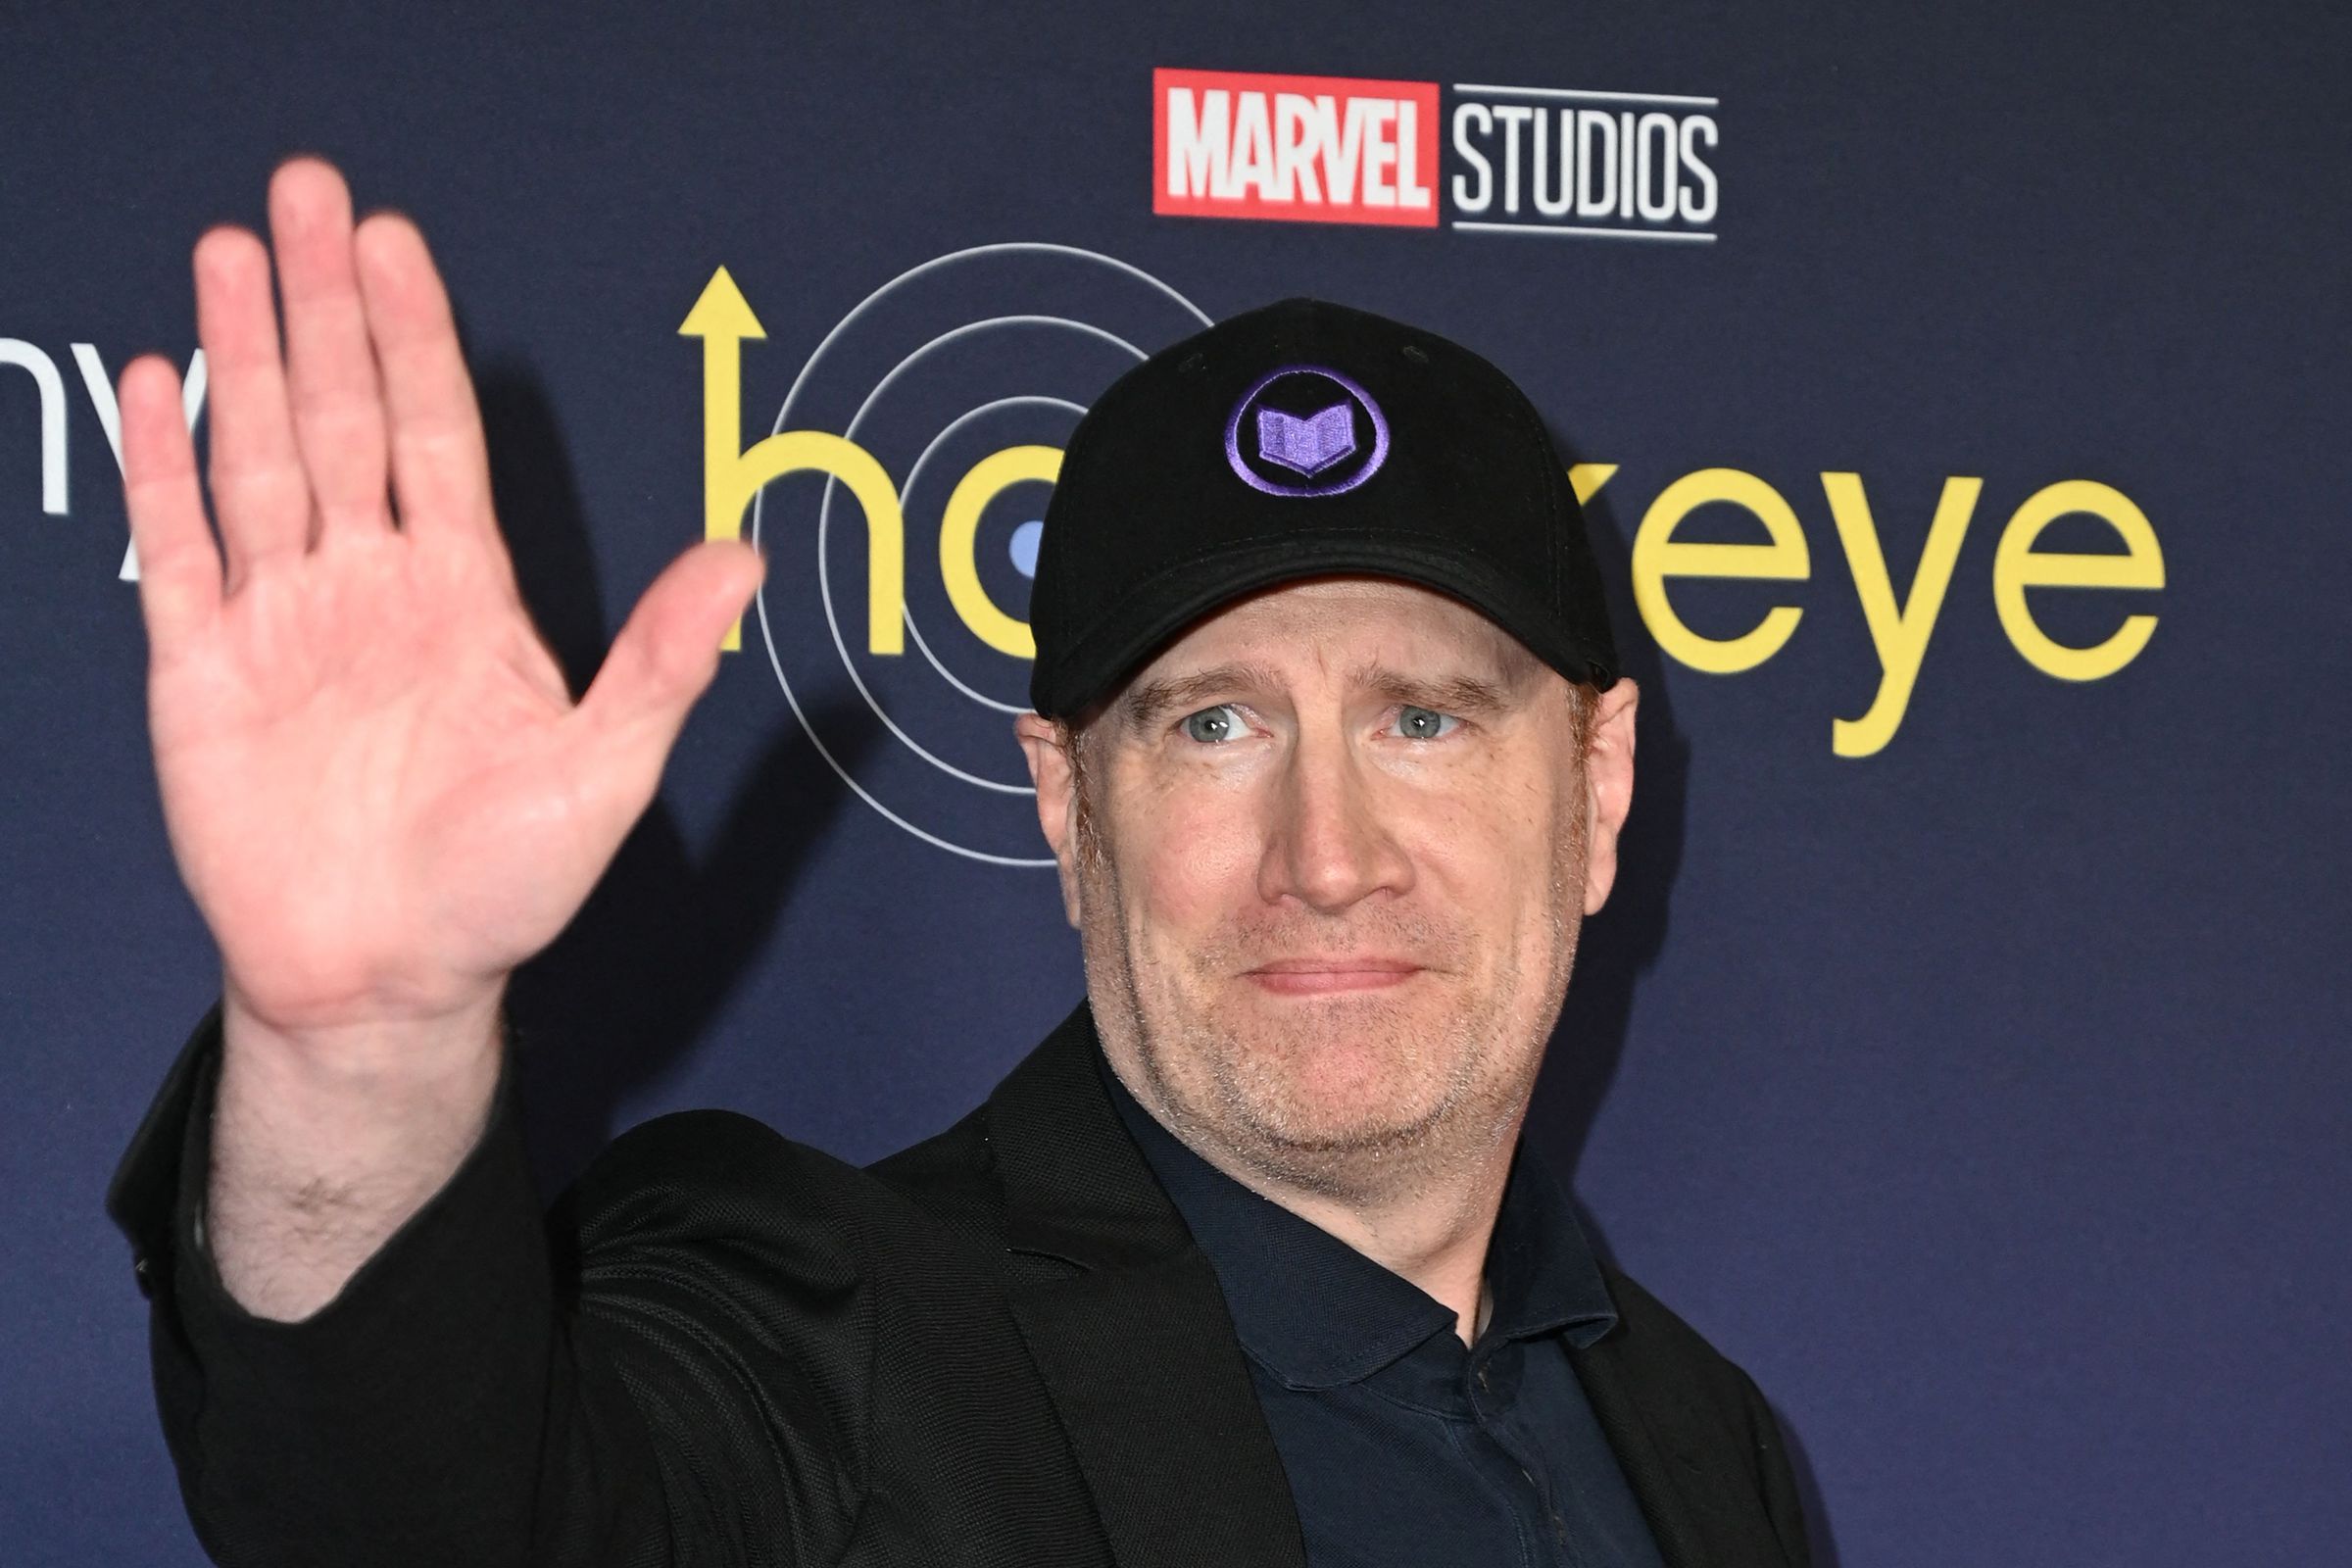 A picture of Kevin Feige waving to someone out of frame.